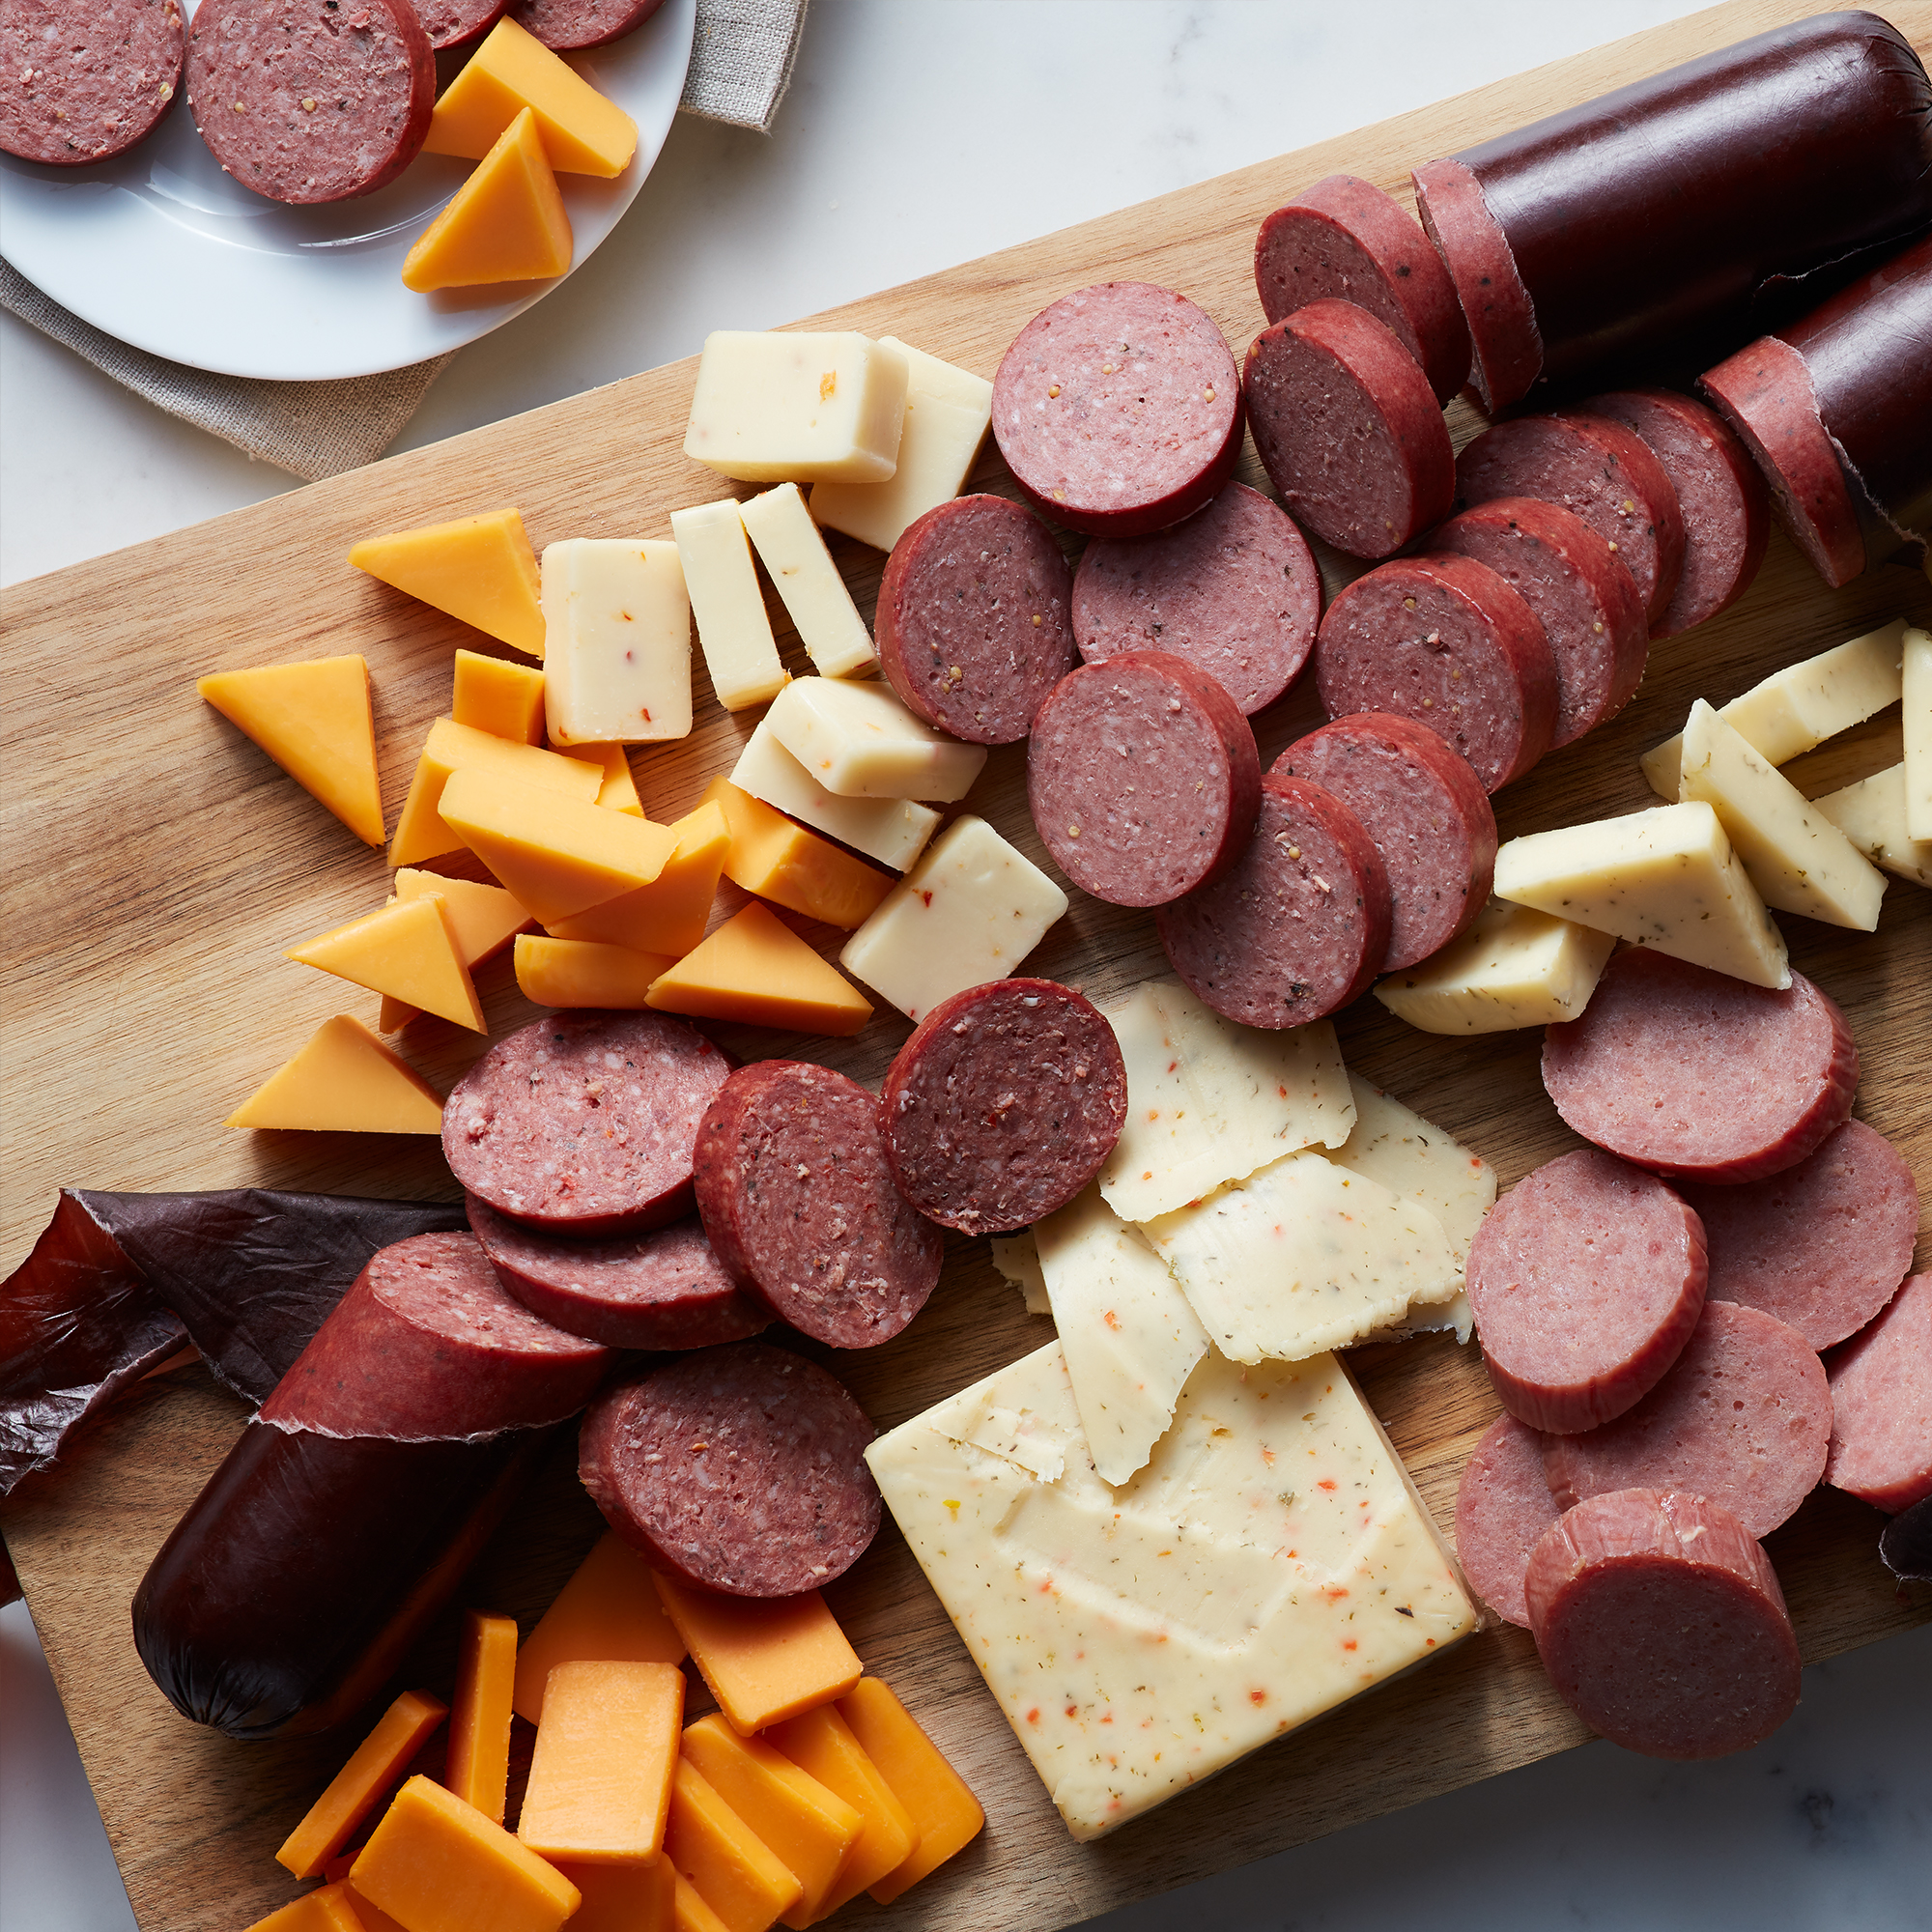 Hickory Farms Beef Summer Sausage & Cheese Medium Gift Box | Gourmet Food Gift